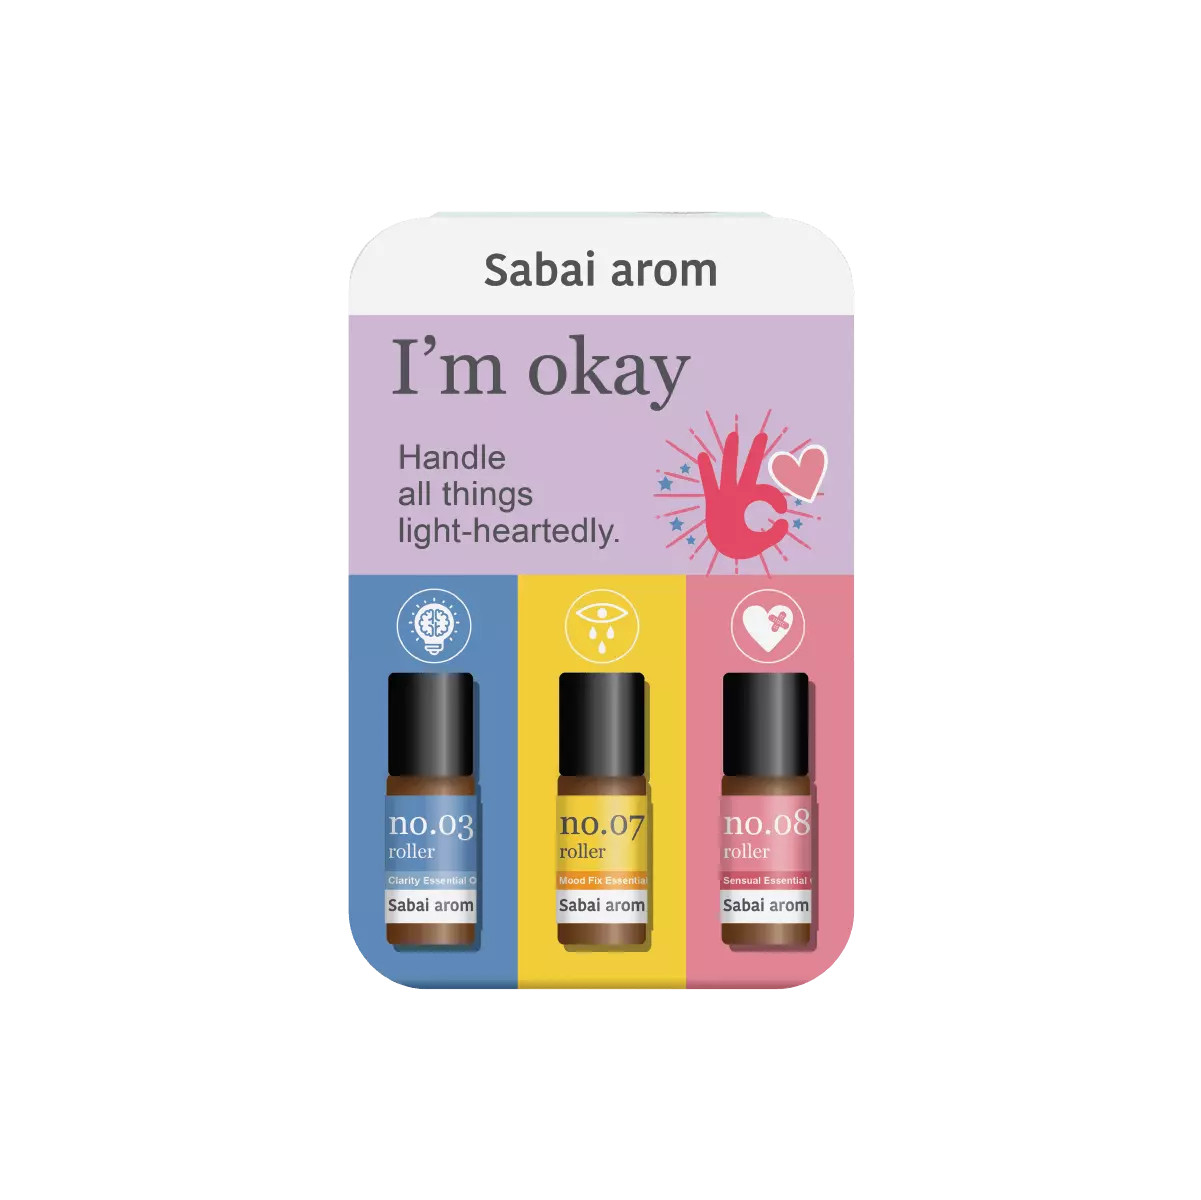 im okay petite trio 1 <h2>The power of essential oils in mini sizing with 3 different blends</h2> <strong>No.03</strong> With the soul essences of plants distilled from Rosemary, Bergamot, Peppermint, Lemon and Lavender, to dilute thinking blockage and inspire mental clarity. <strong>No.07</strong> With the soul essences of plants distilled from Lemon, Grapefruit, Lime, Cornmint, Eucalyptus and Sweet Orange, to connect exhausted mind to the full liveliness. <strong>No.08</strong> With the soul essences of plants distilled from Geranium, Bergamot, Eucalyptus, Chamomile, Cedarwood, to unlock wounded heart from emotional cage.